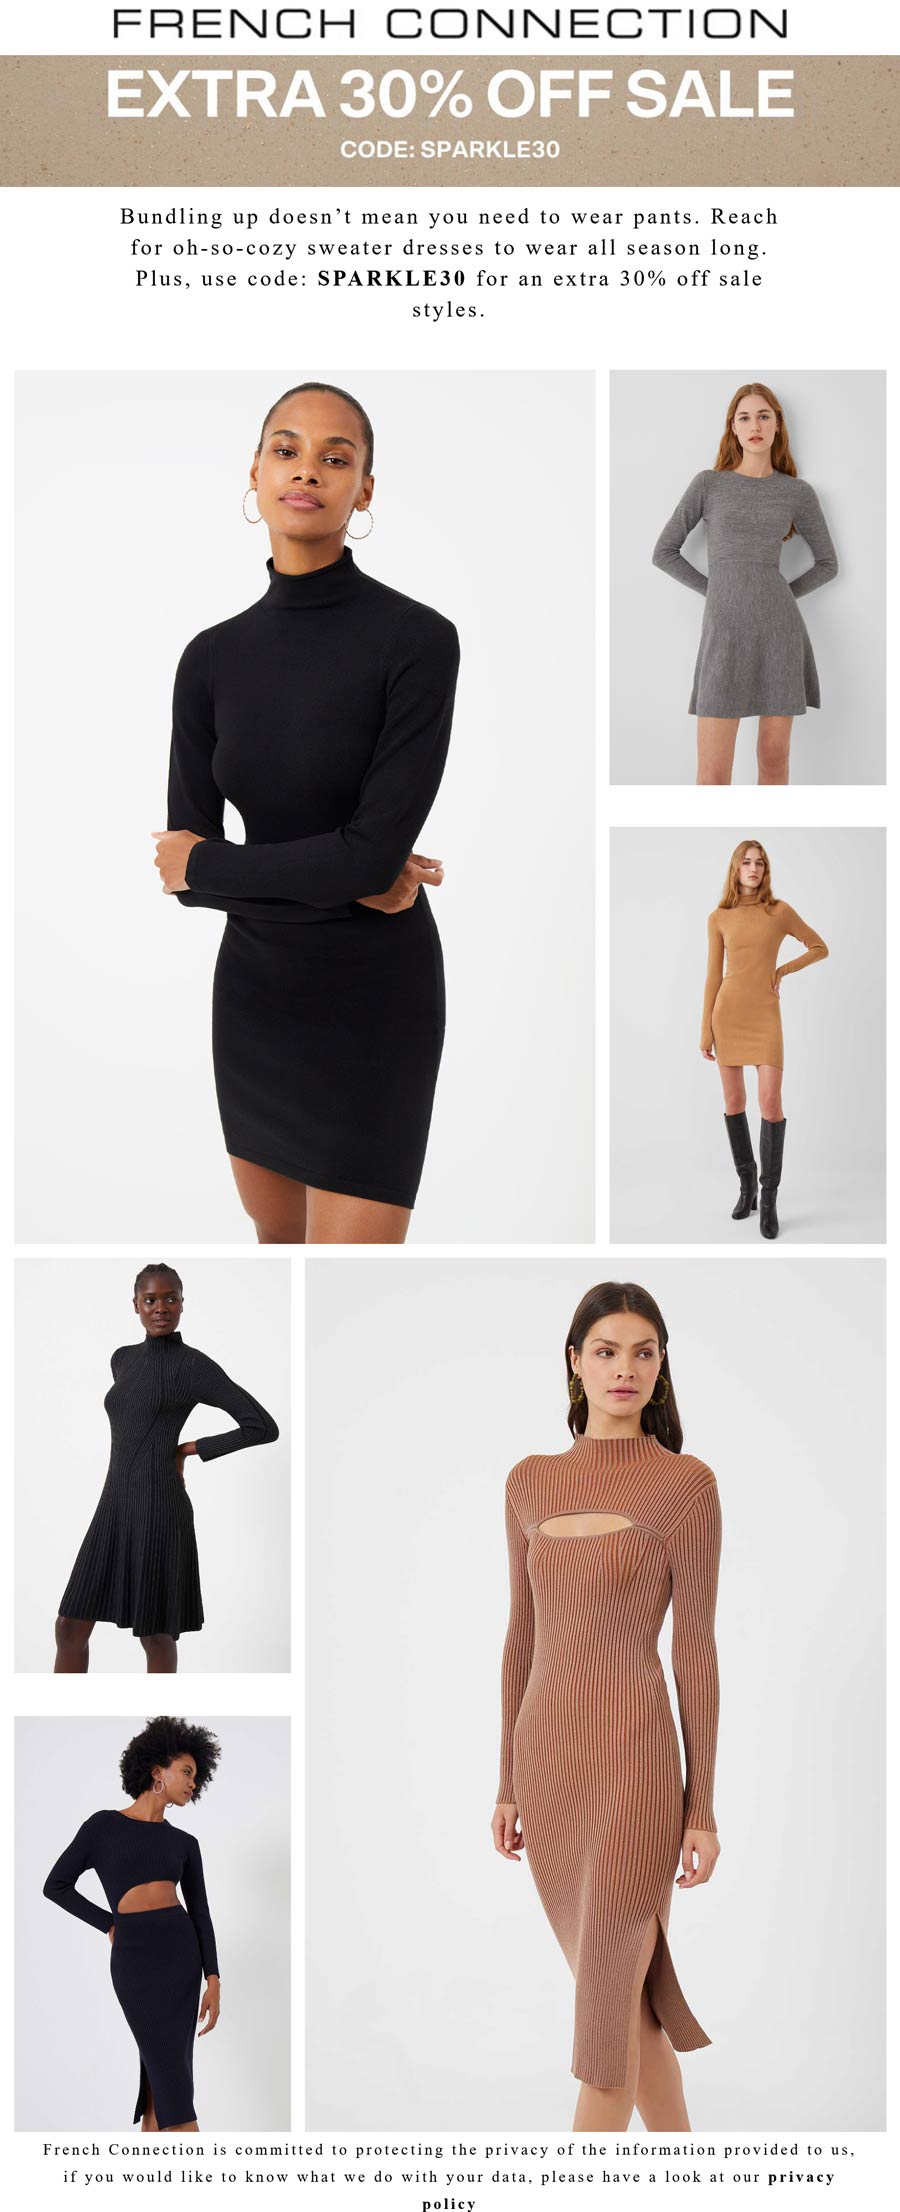 French Connection stores Coupon  Extra 30% off sale items at French Connection via promo code SPARKLE30 #frenchconnection 